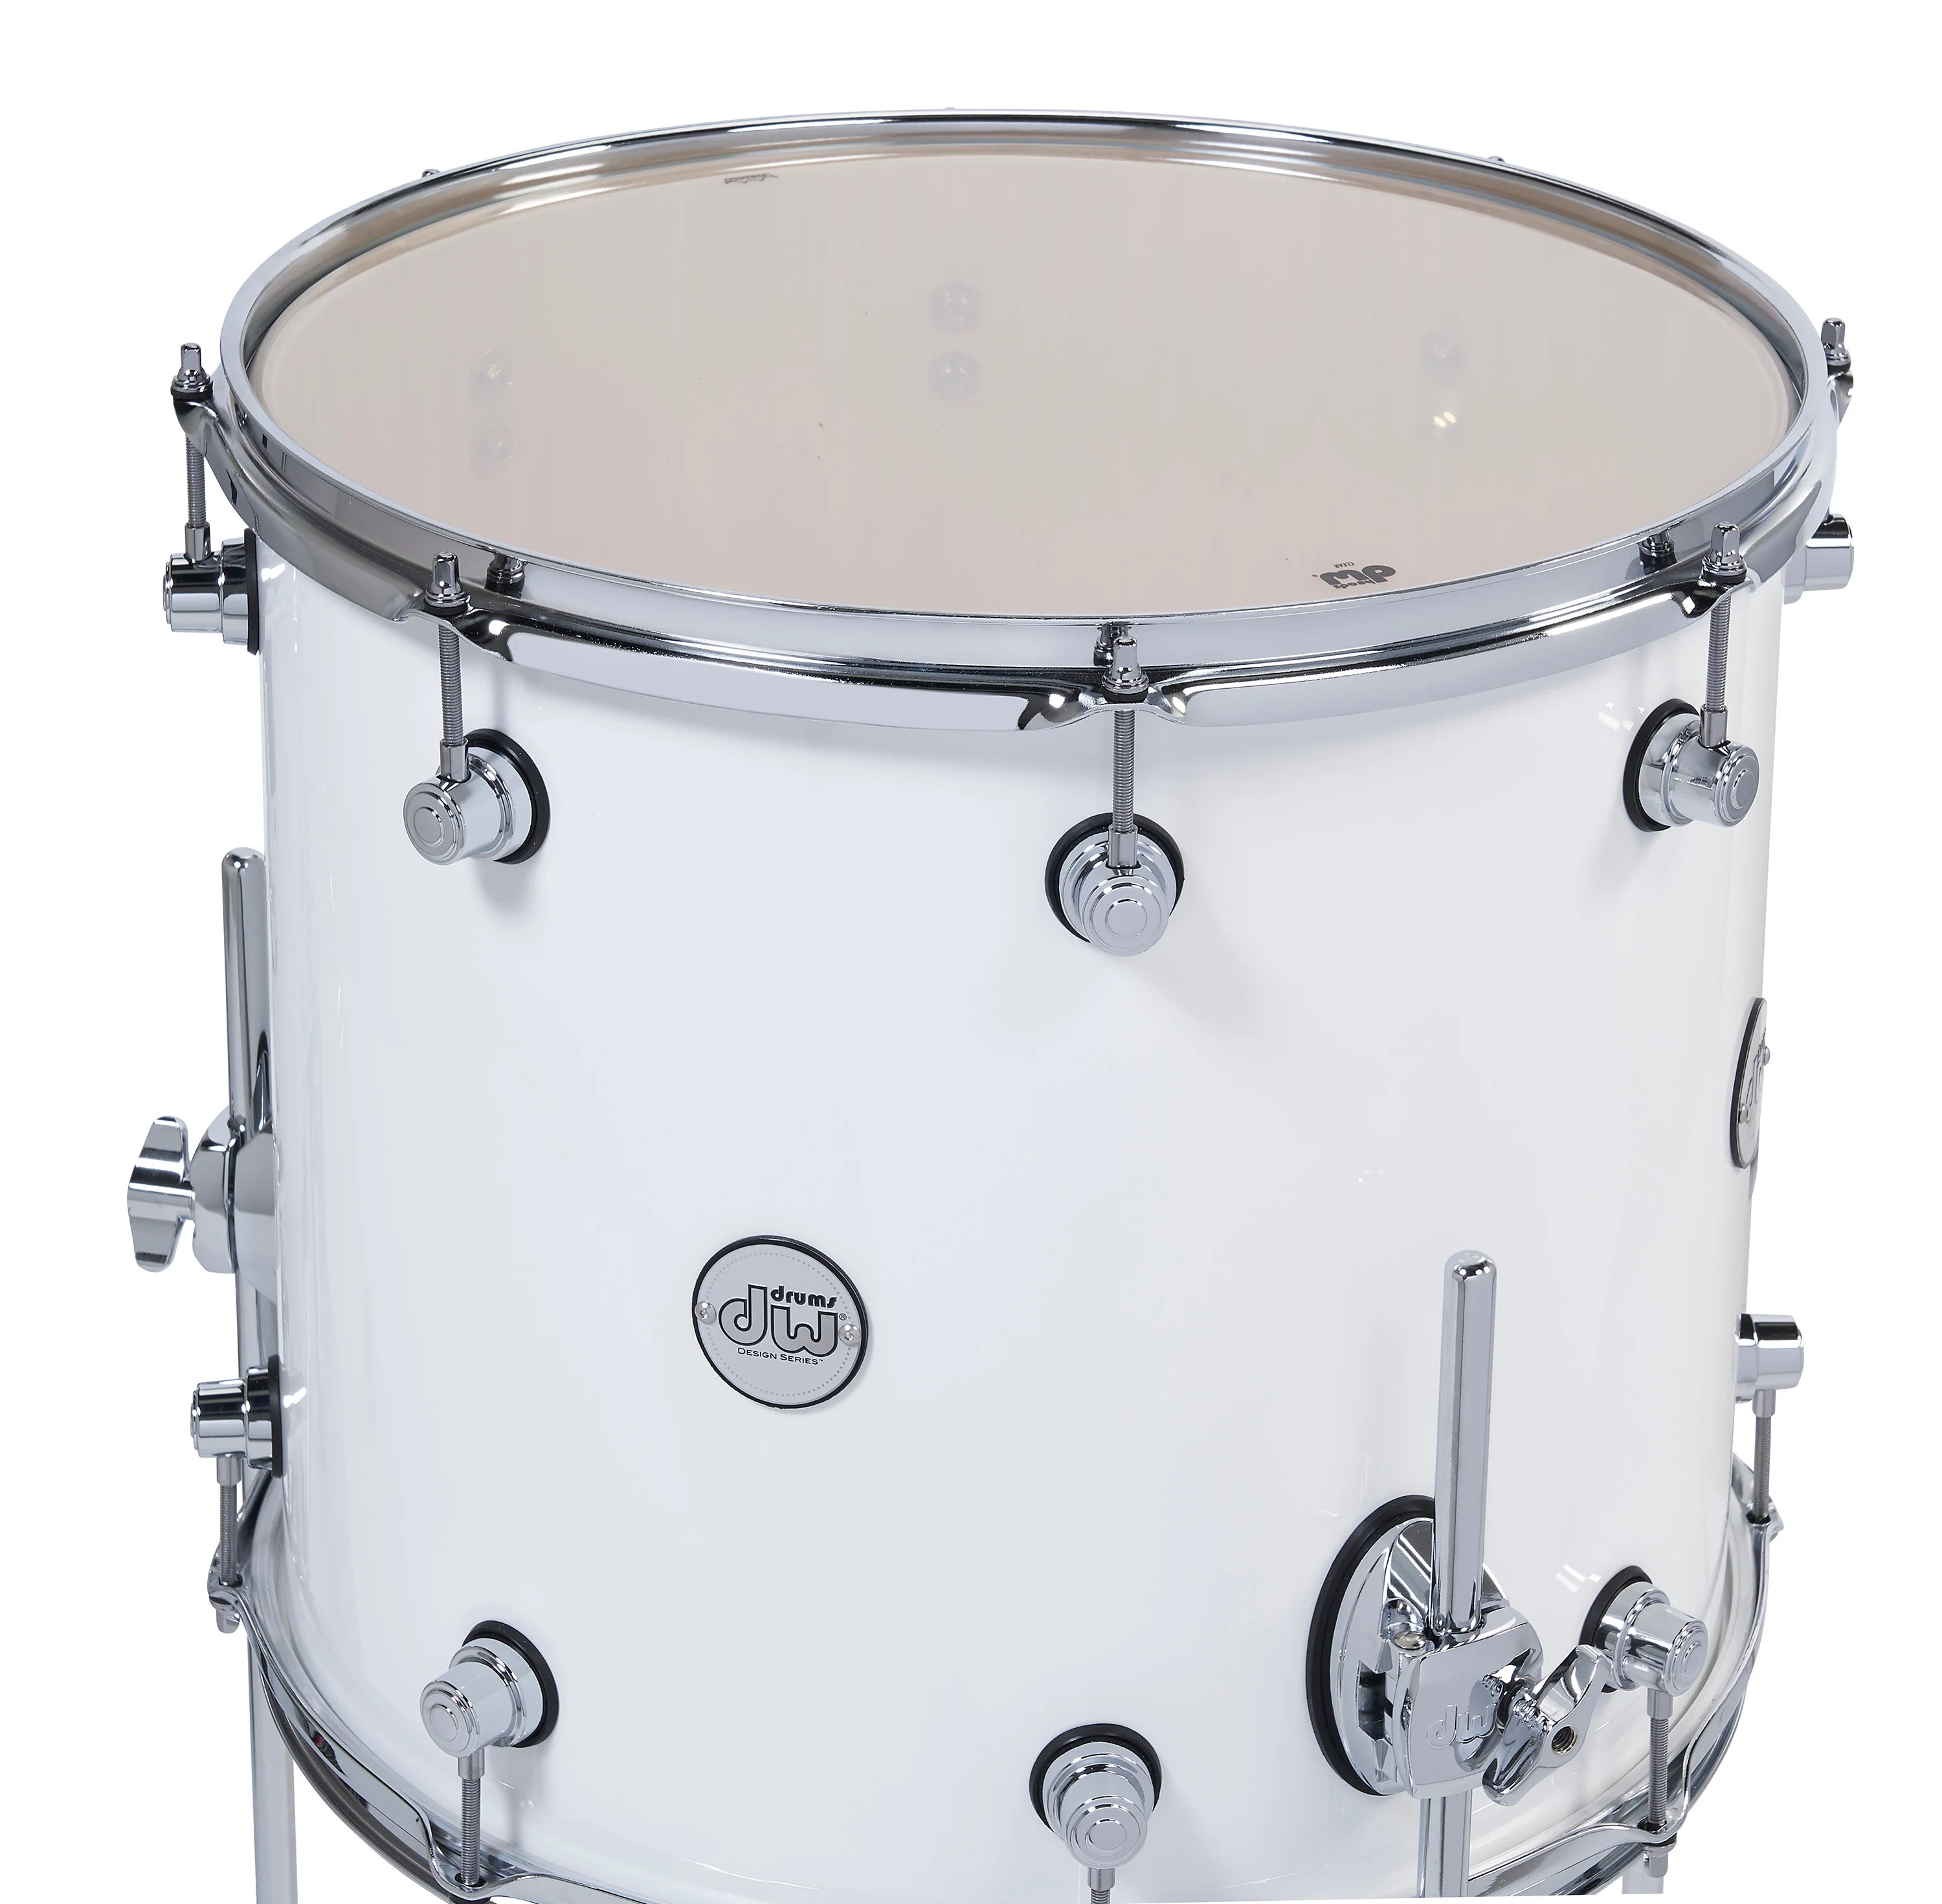 DW Design Series 4-Piece Shell Pack - Gloss White